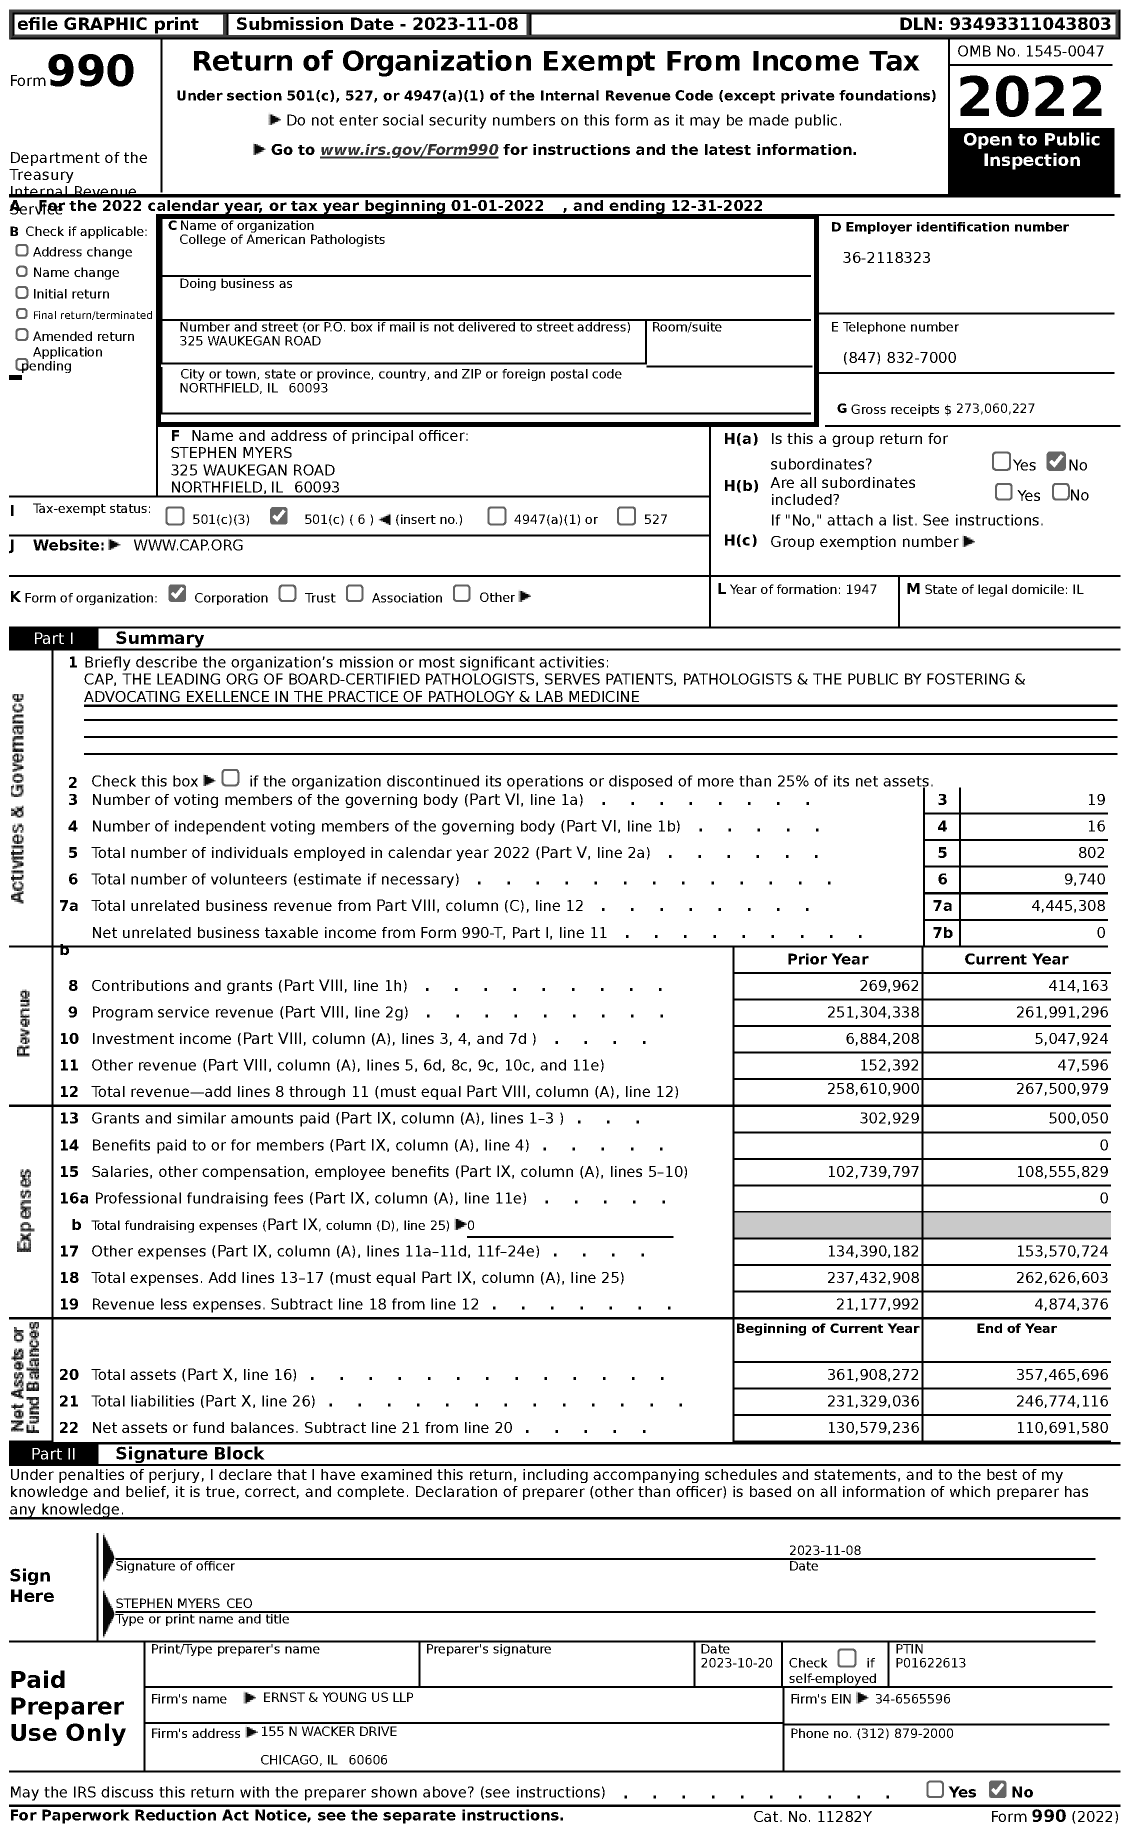 Image of first page of 2022 Form 990 for College of American Pathologists (CAP)